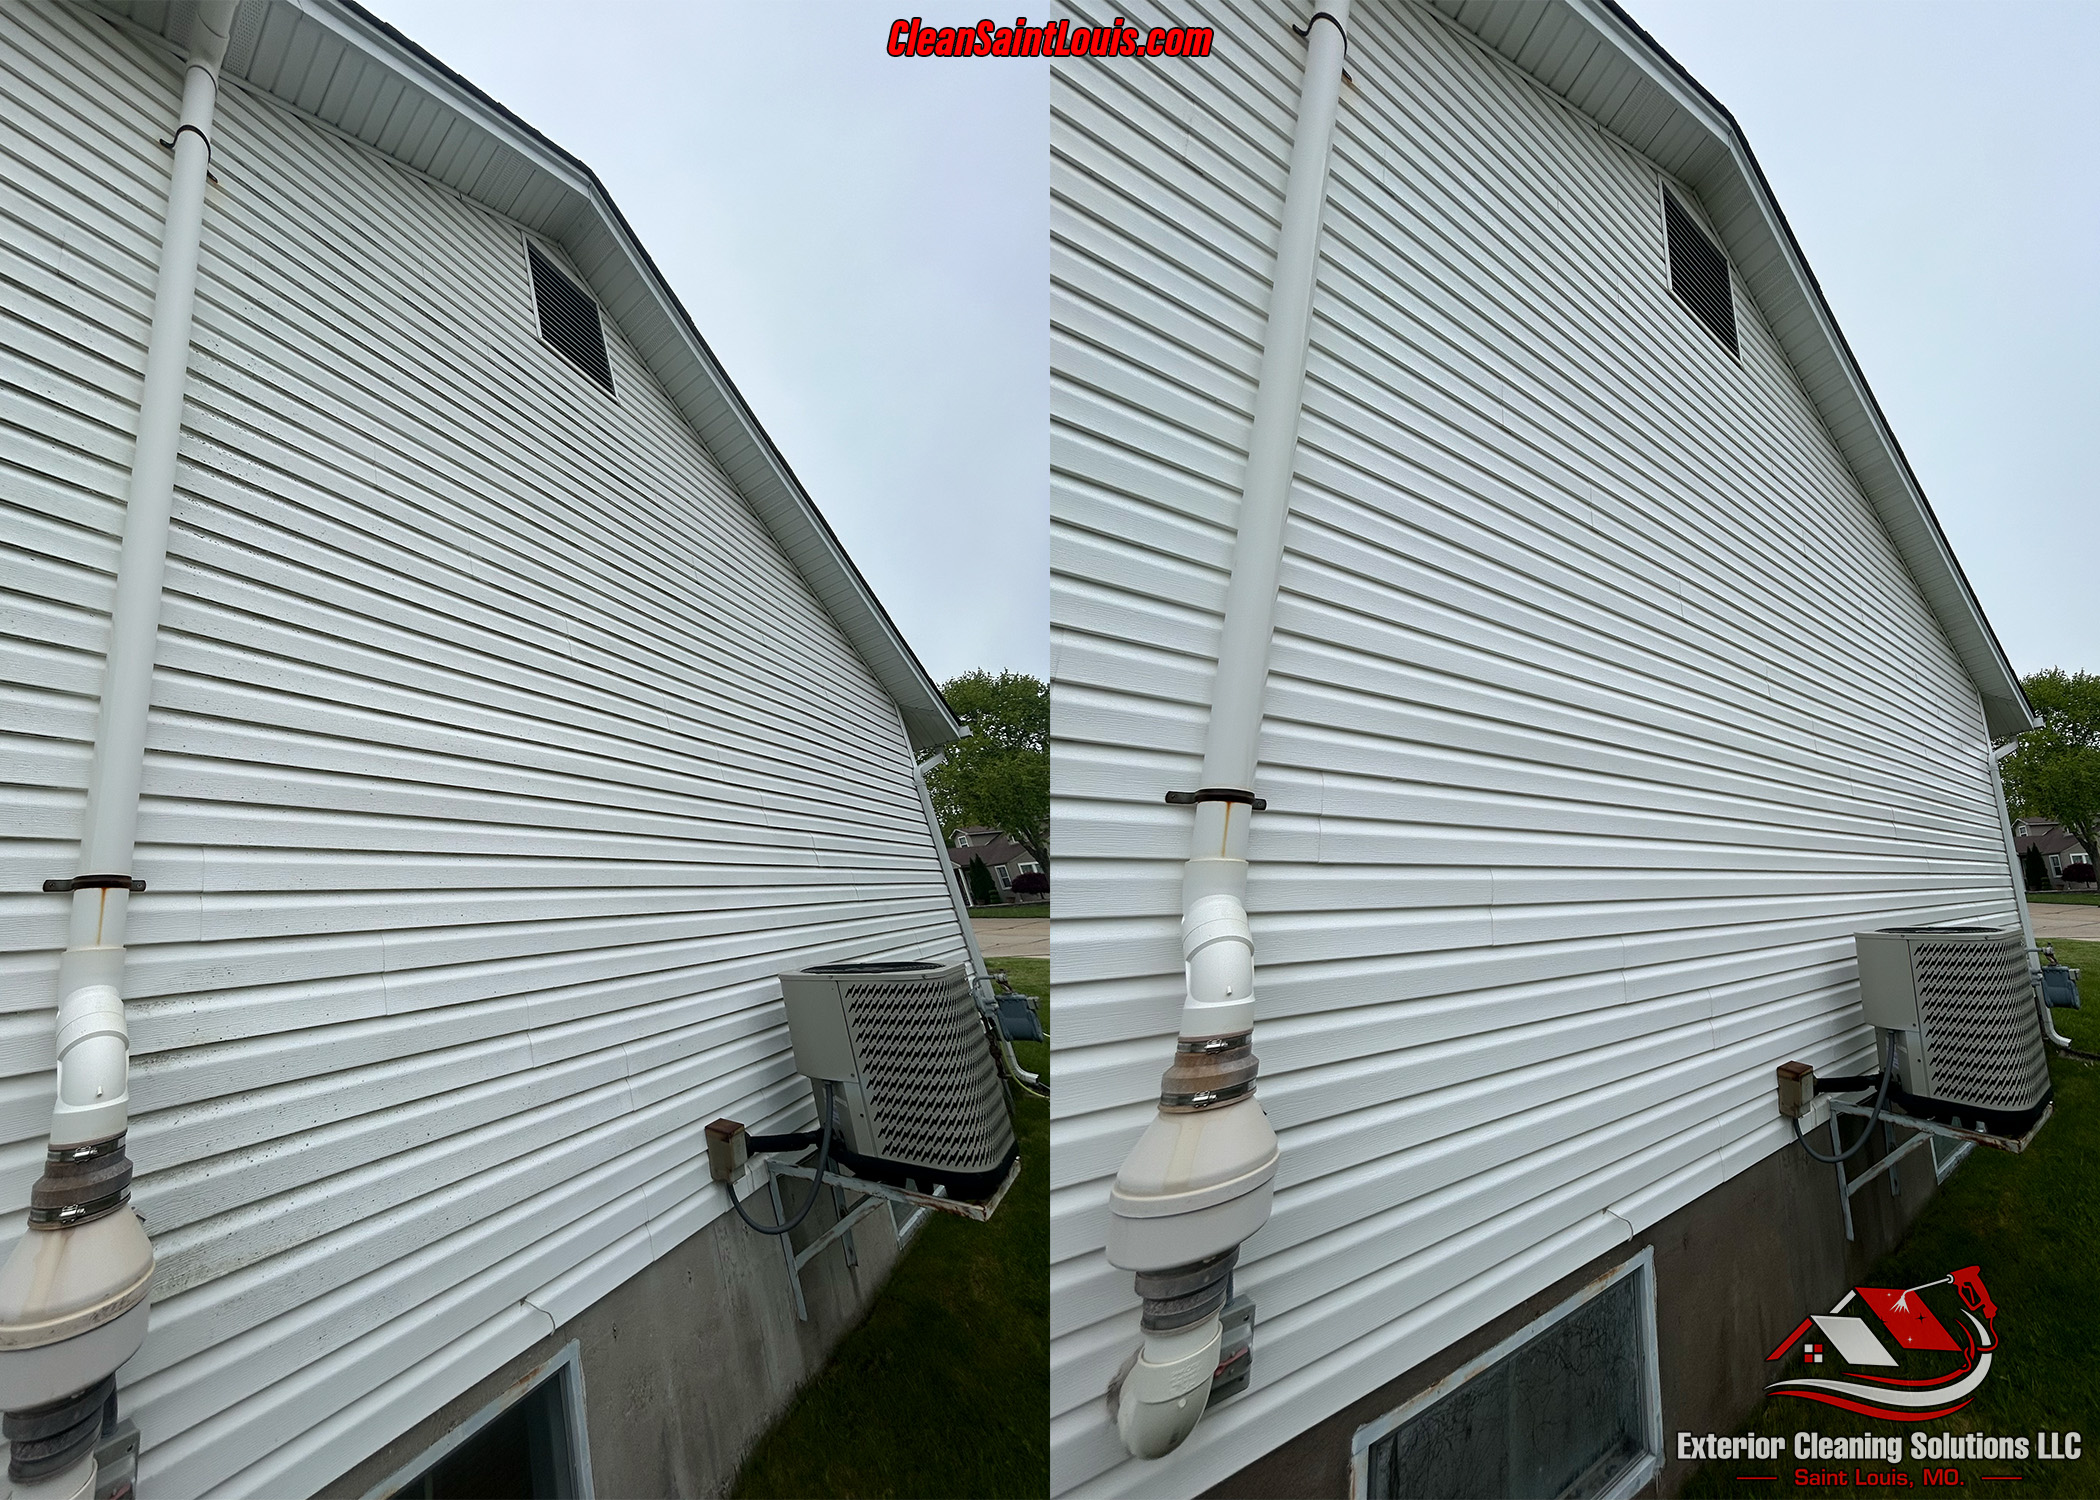 Trusted Power Washing and House Washing in St. Peters, MO.